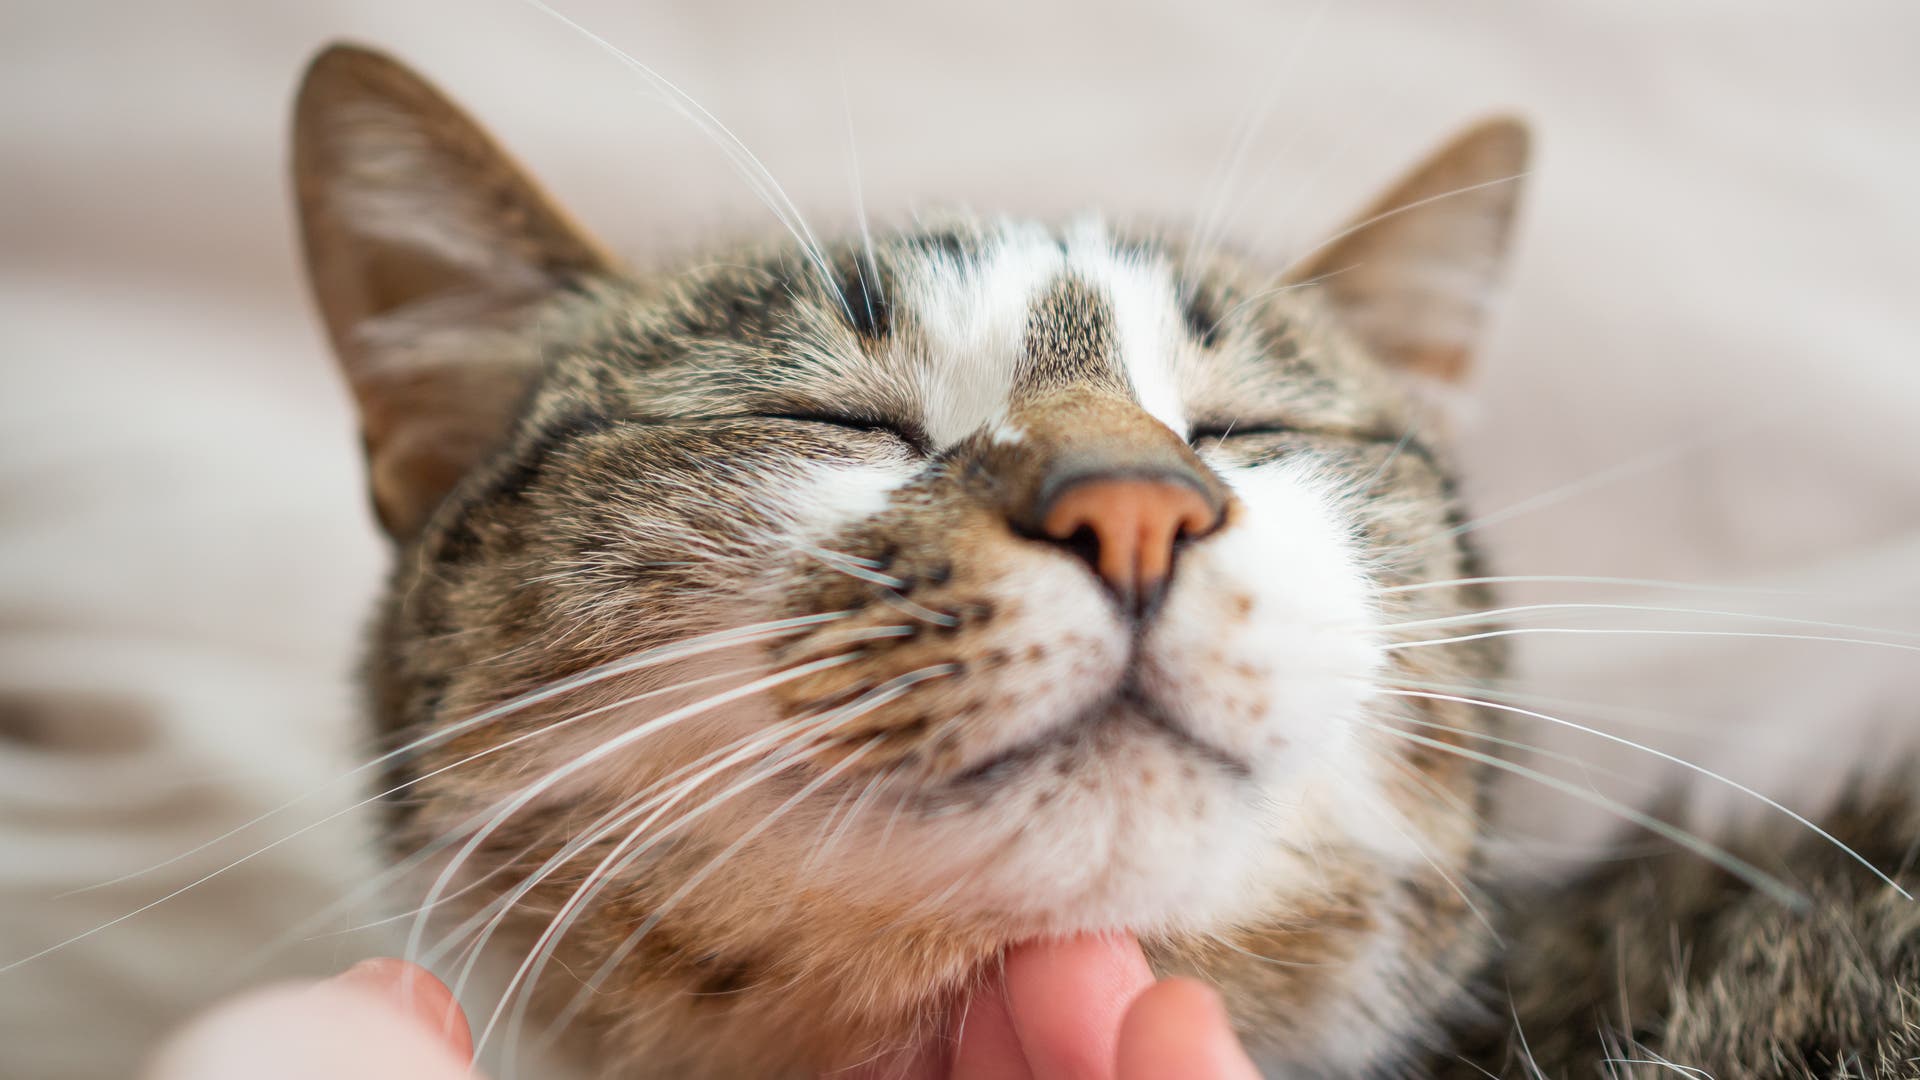 Animal Sounds: Why can cats purr so deeply?